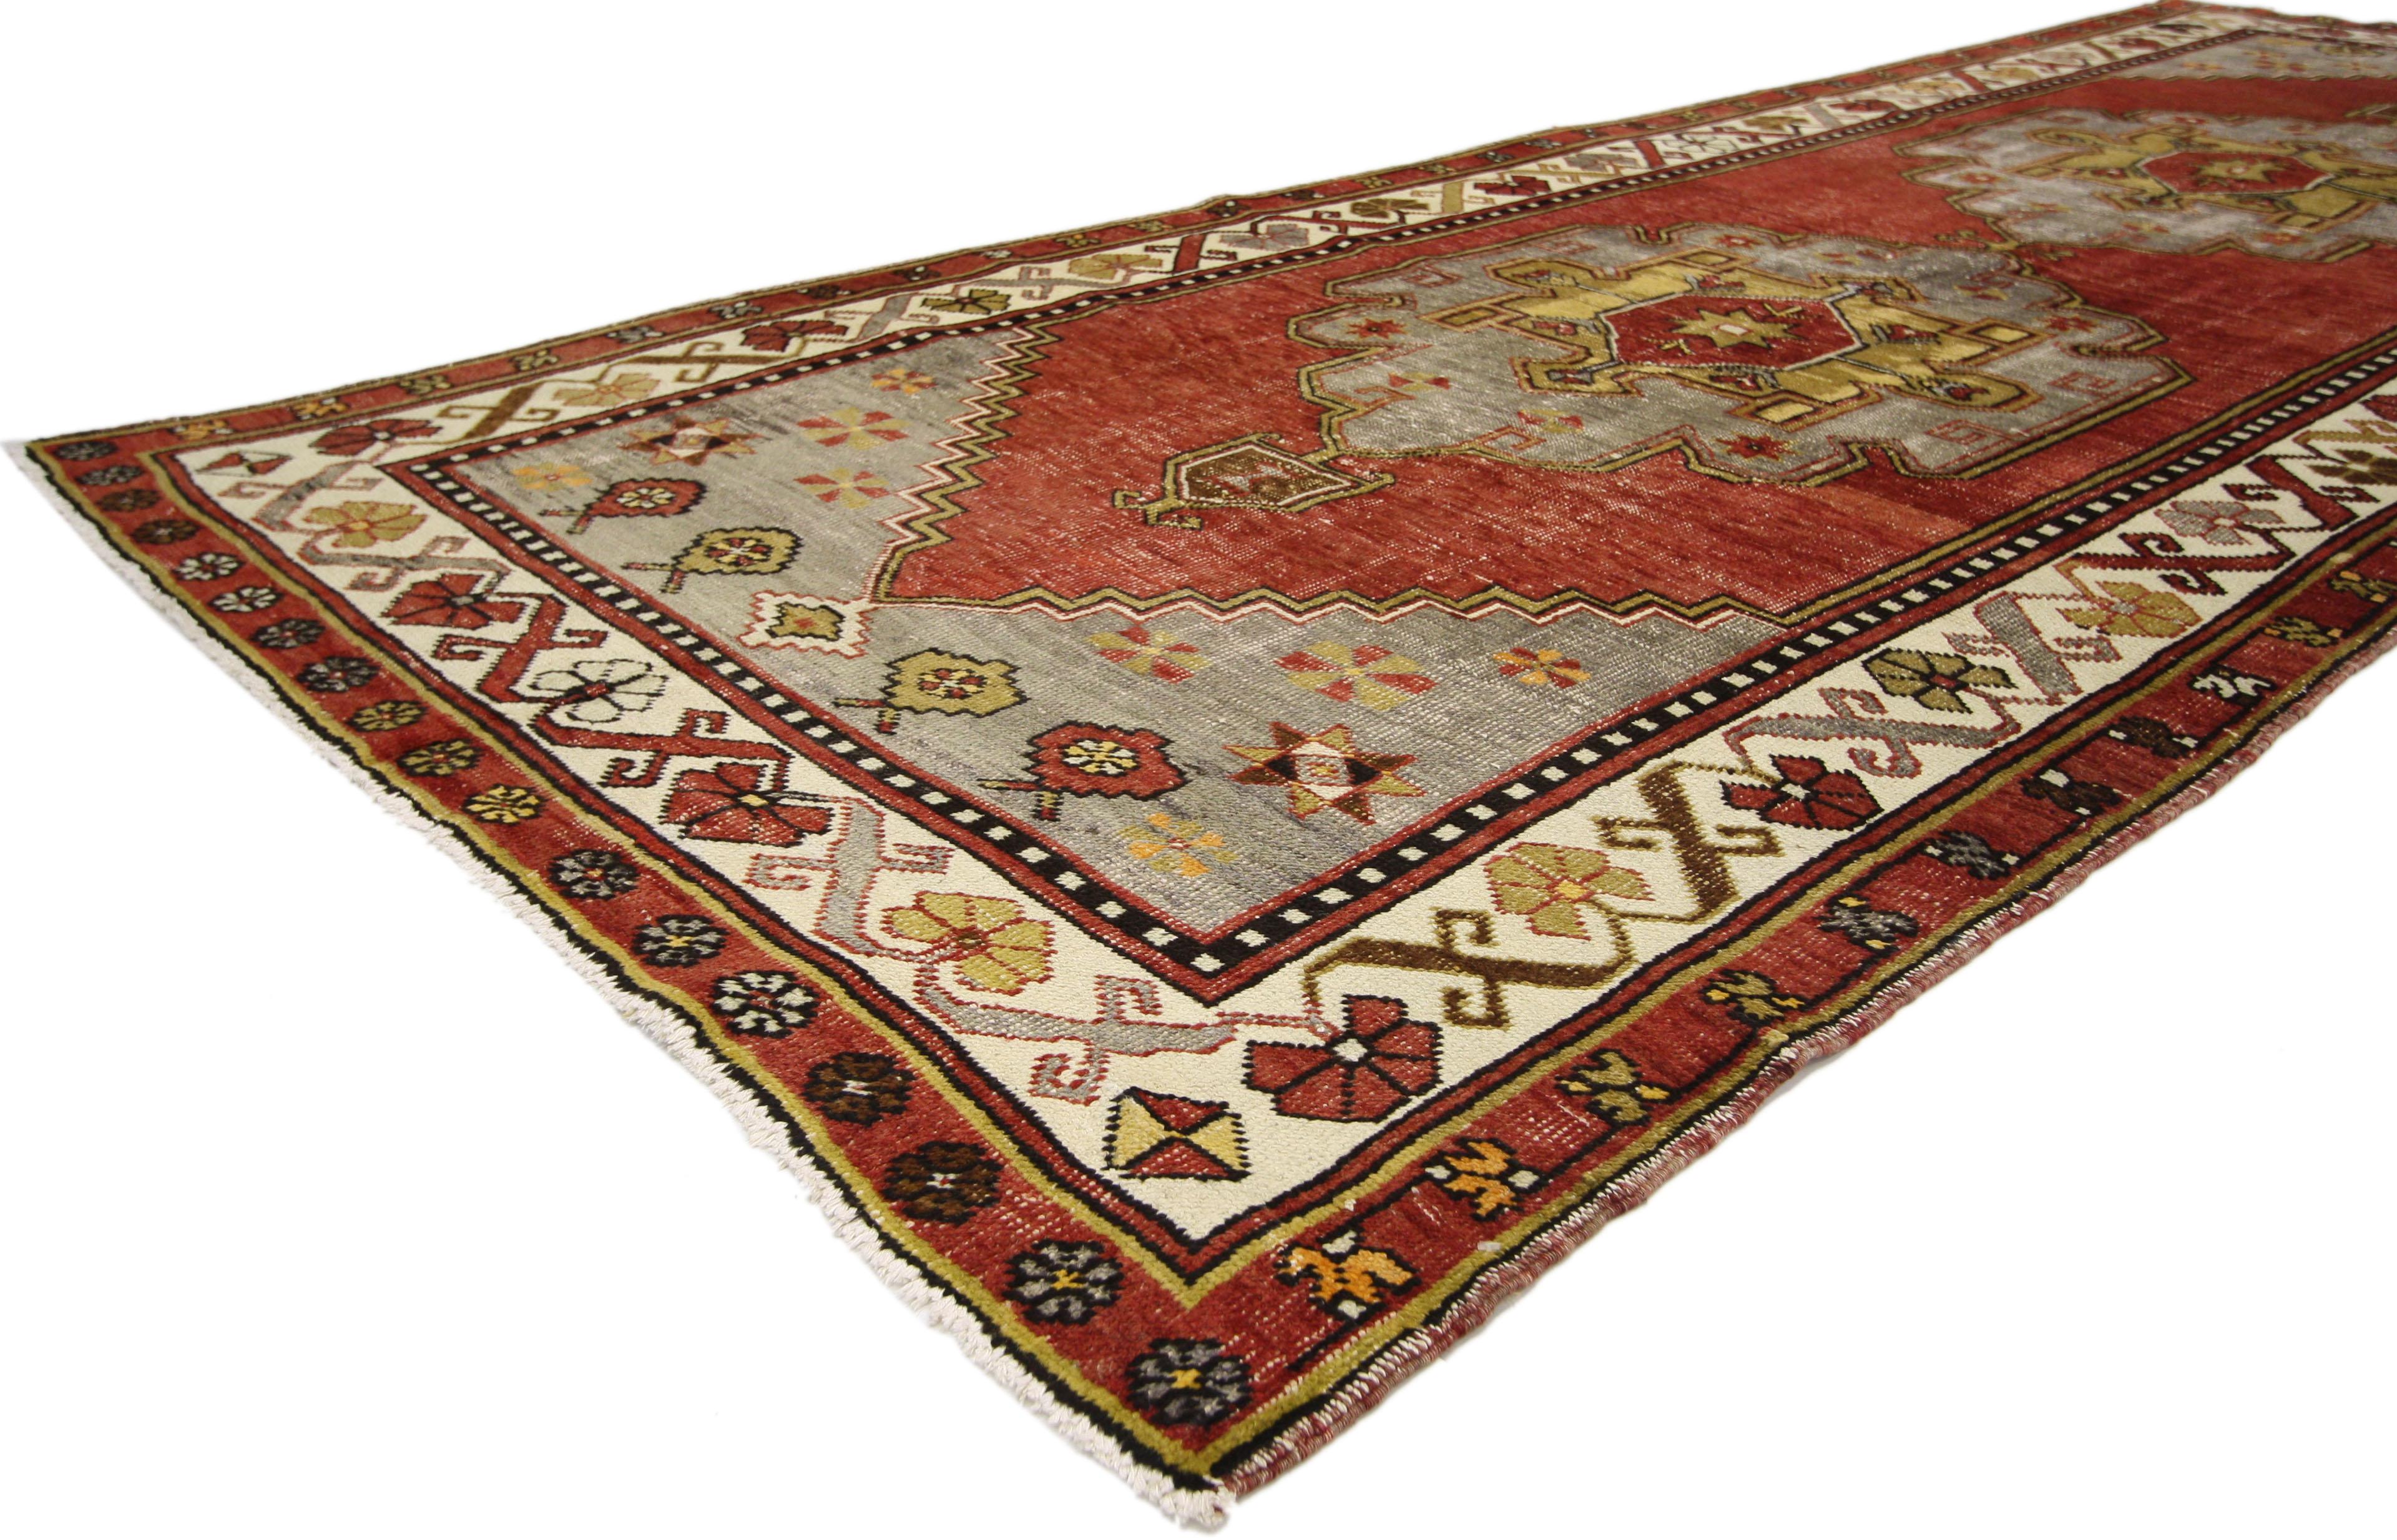 73885 Distressed Vintage Turkish Oushak Gallery Rug, Wide Hallway Runner 04'09 x 13'05. The harmony of refined color palette combined with Classic Turkish style creates an unforgettable scene and lasting impression. This vintage Turkish Oushak